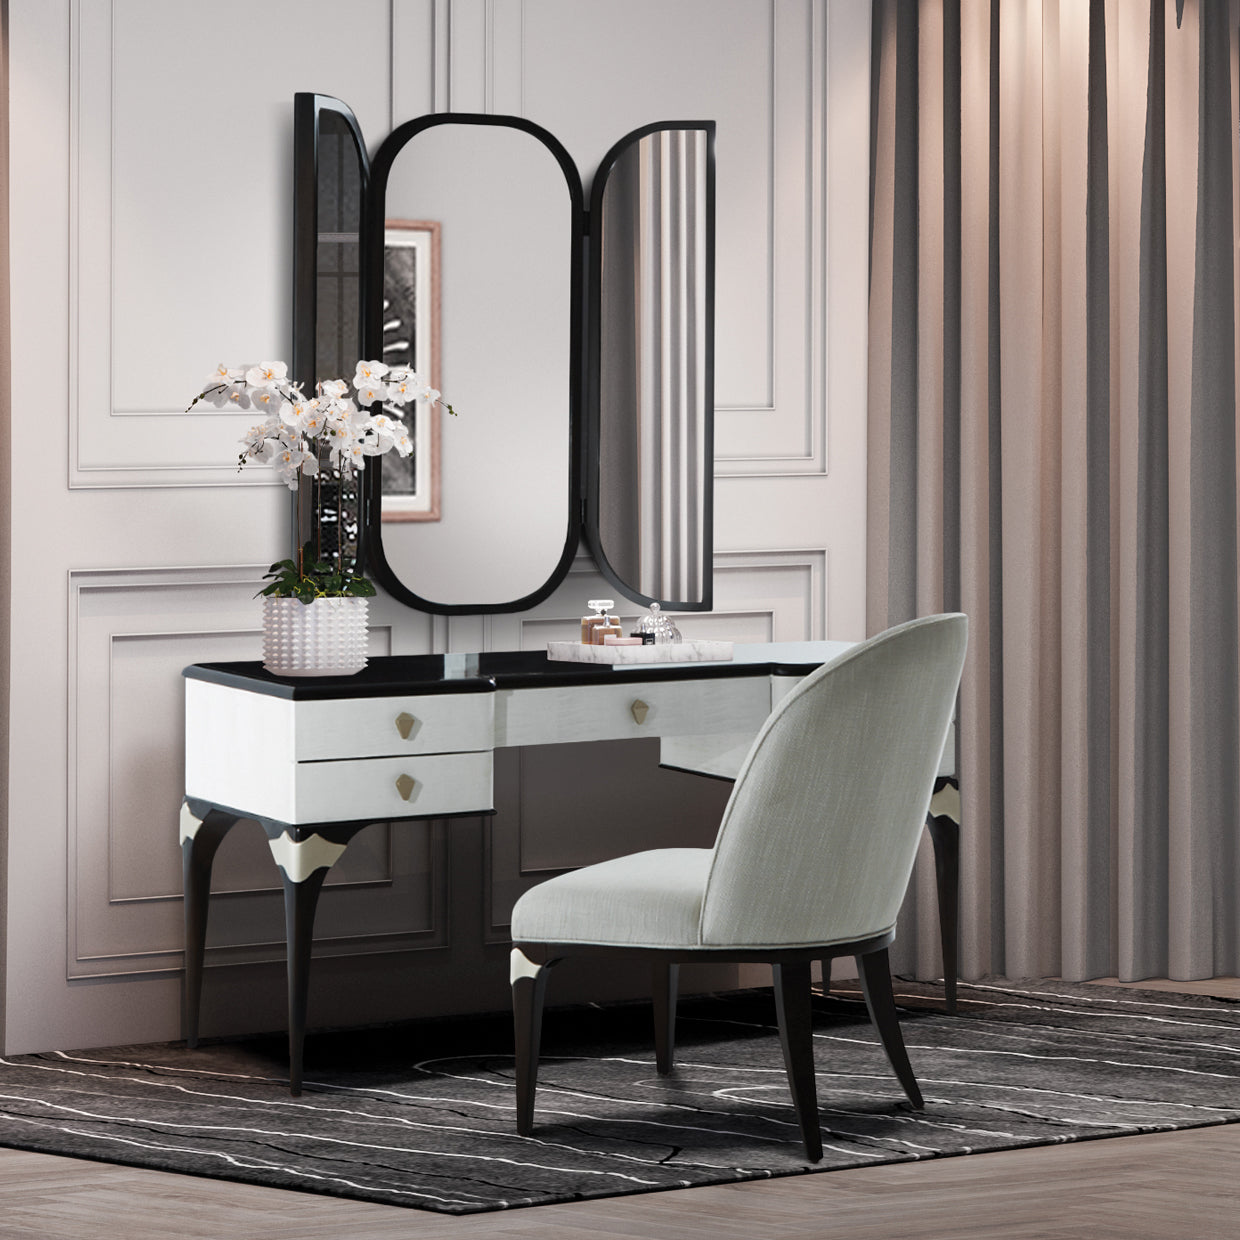 Paris Chic Vanity Desk Chair, Glamorous, Frosted linen seat, Curving shape, Classy, silhouette, Espresso-finished hardwood, Figured Eucalyptus Veneer, Sloping sides, Textured fabric, Frosted linen, Platinum accents, dream art , Michael amini